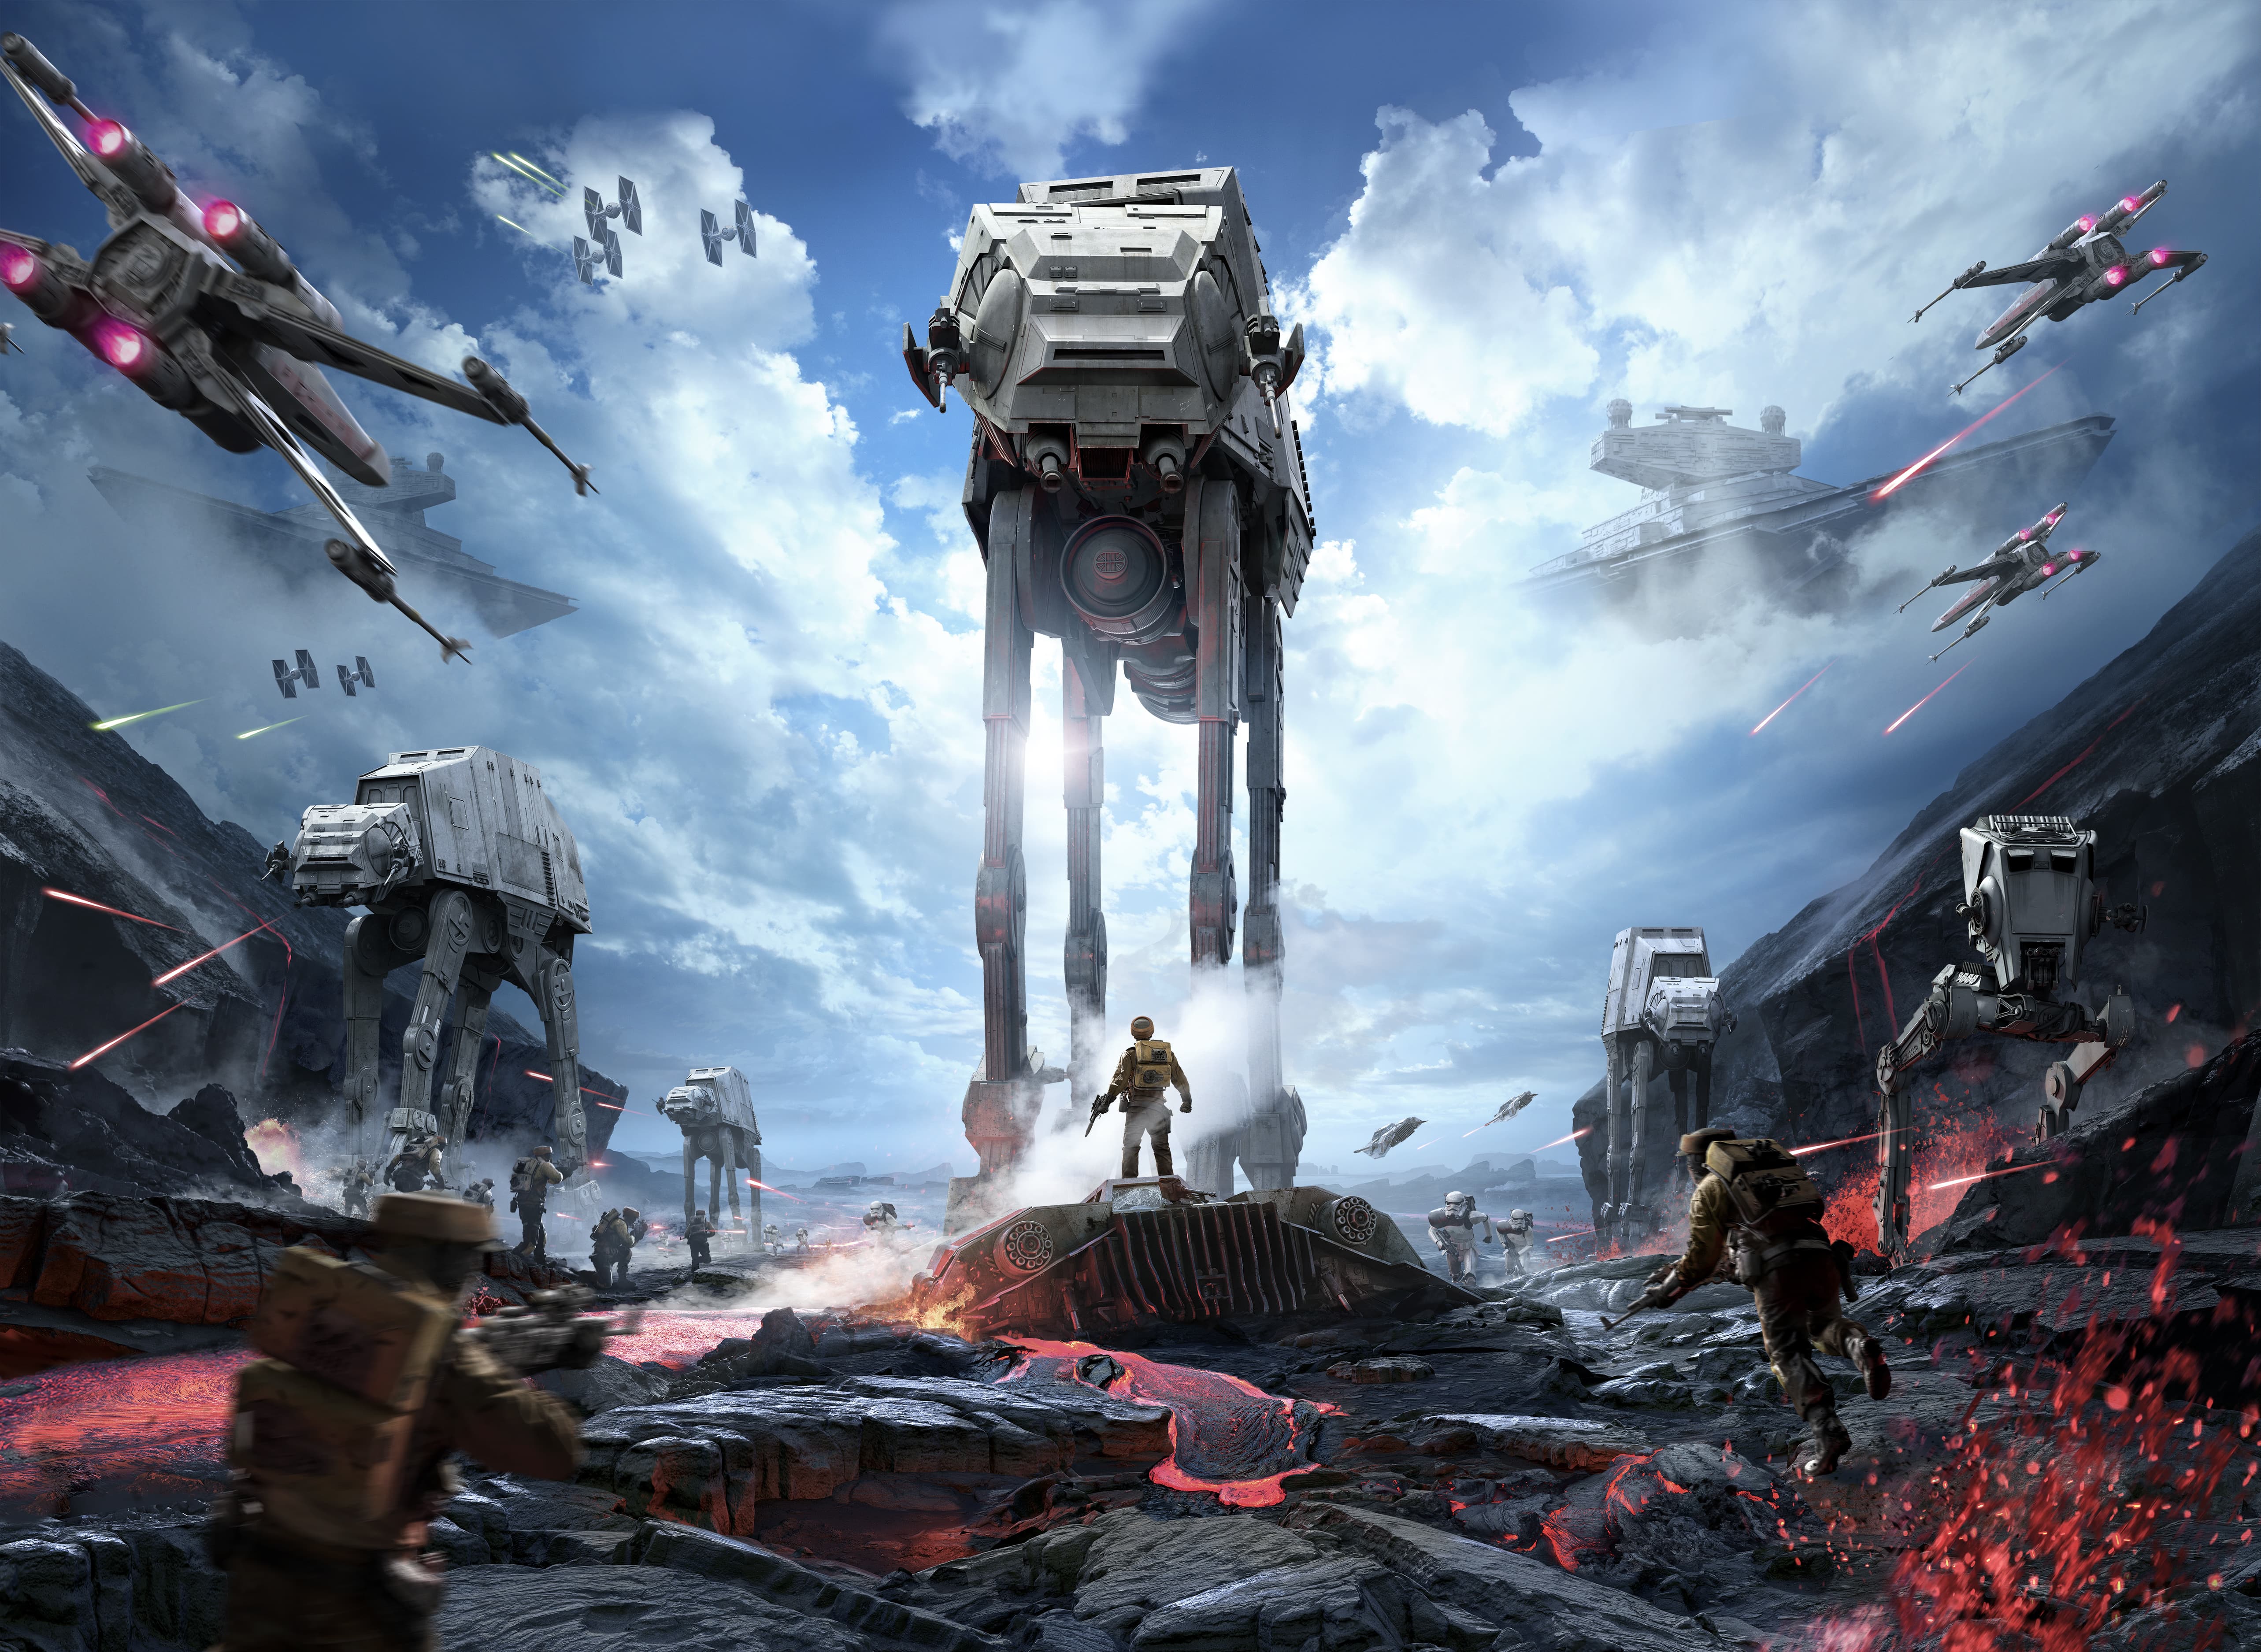 star wars tablet wallpaper,action adventure game,mecha,strategy video game,cg artwork,pc game